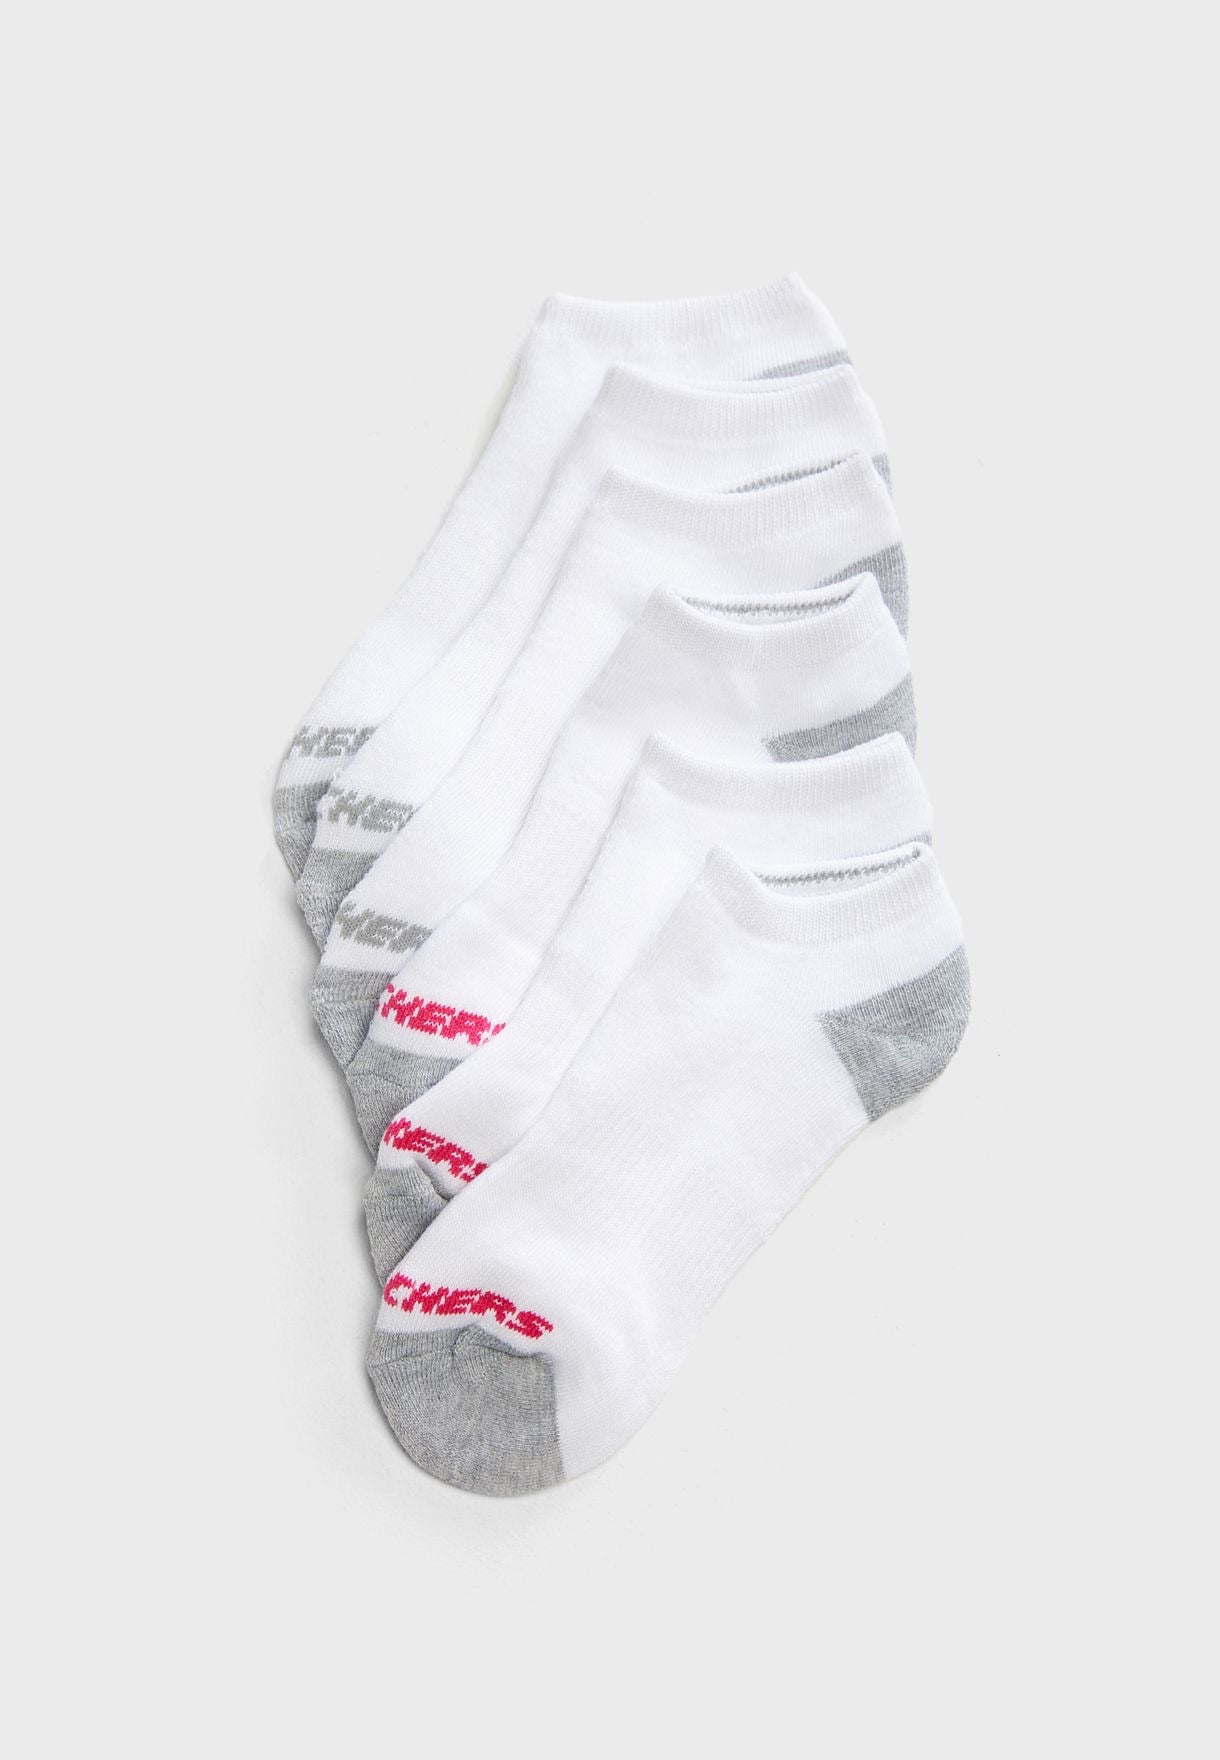 Skechers Chaussettes 6 pack (35-40)